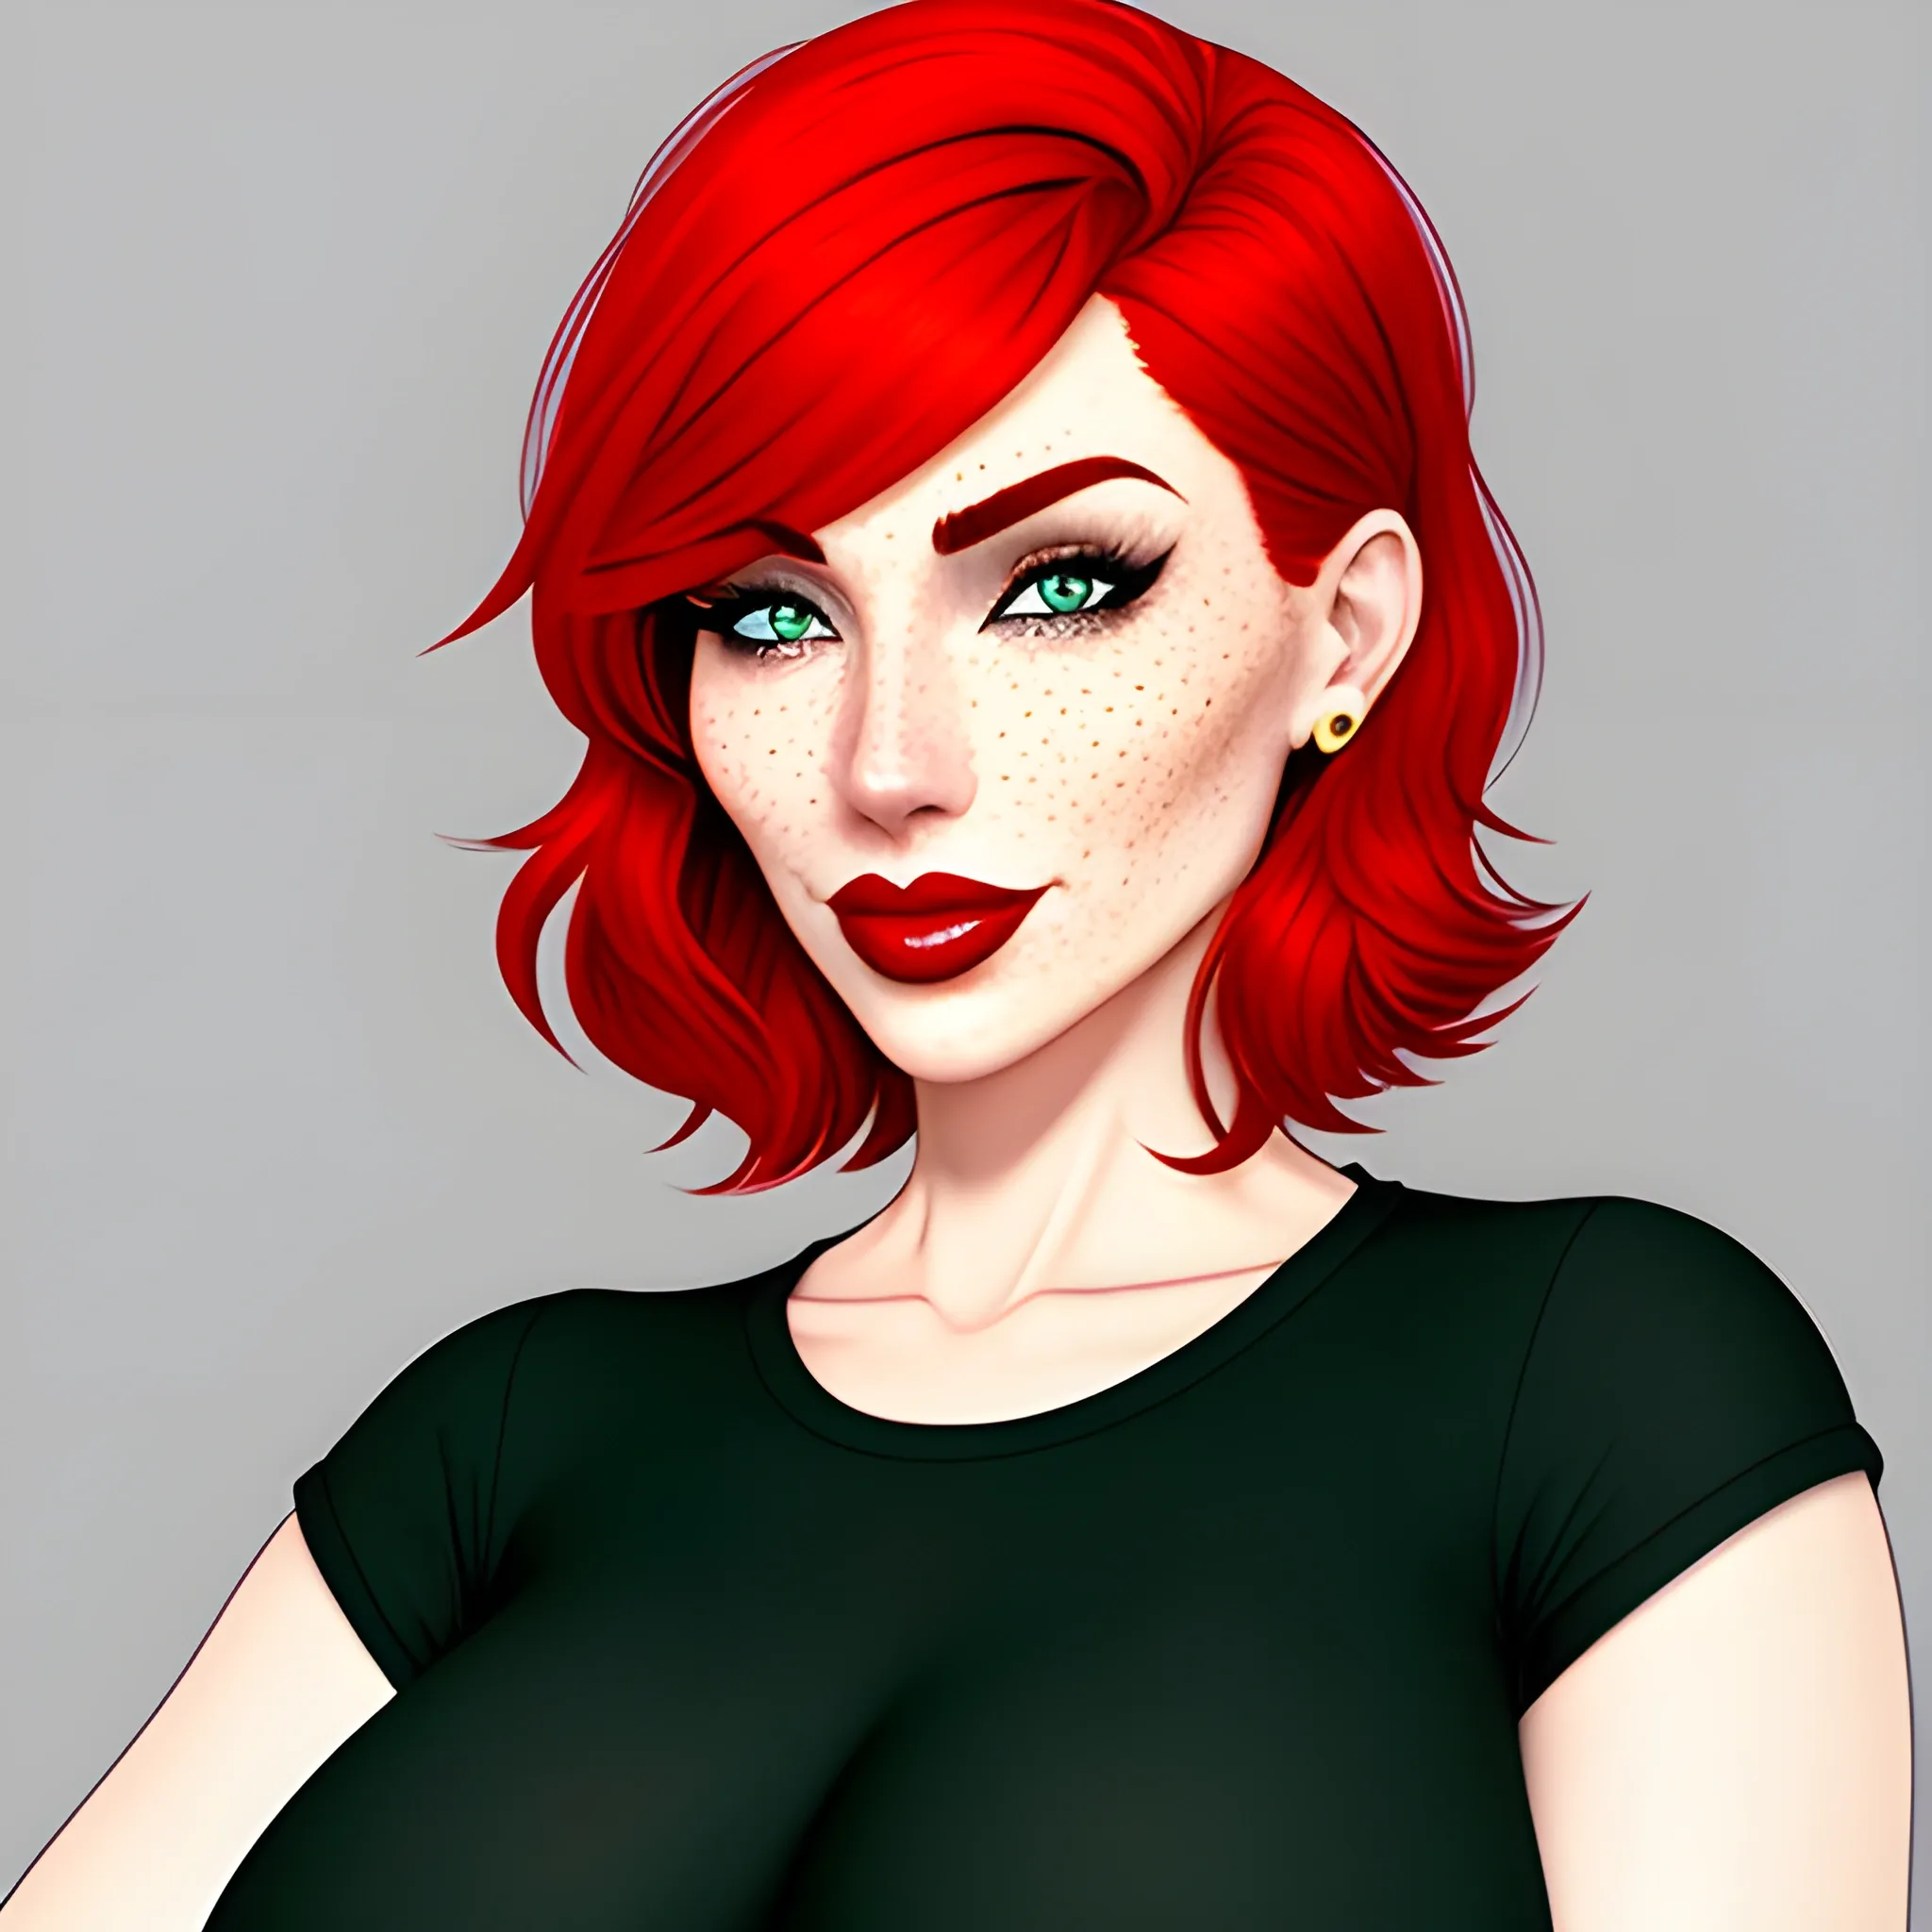 Girl, short hair, freckles on the face, red hair color, big breast, full height, Cartoon, teenager, 